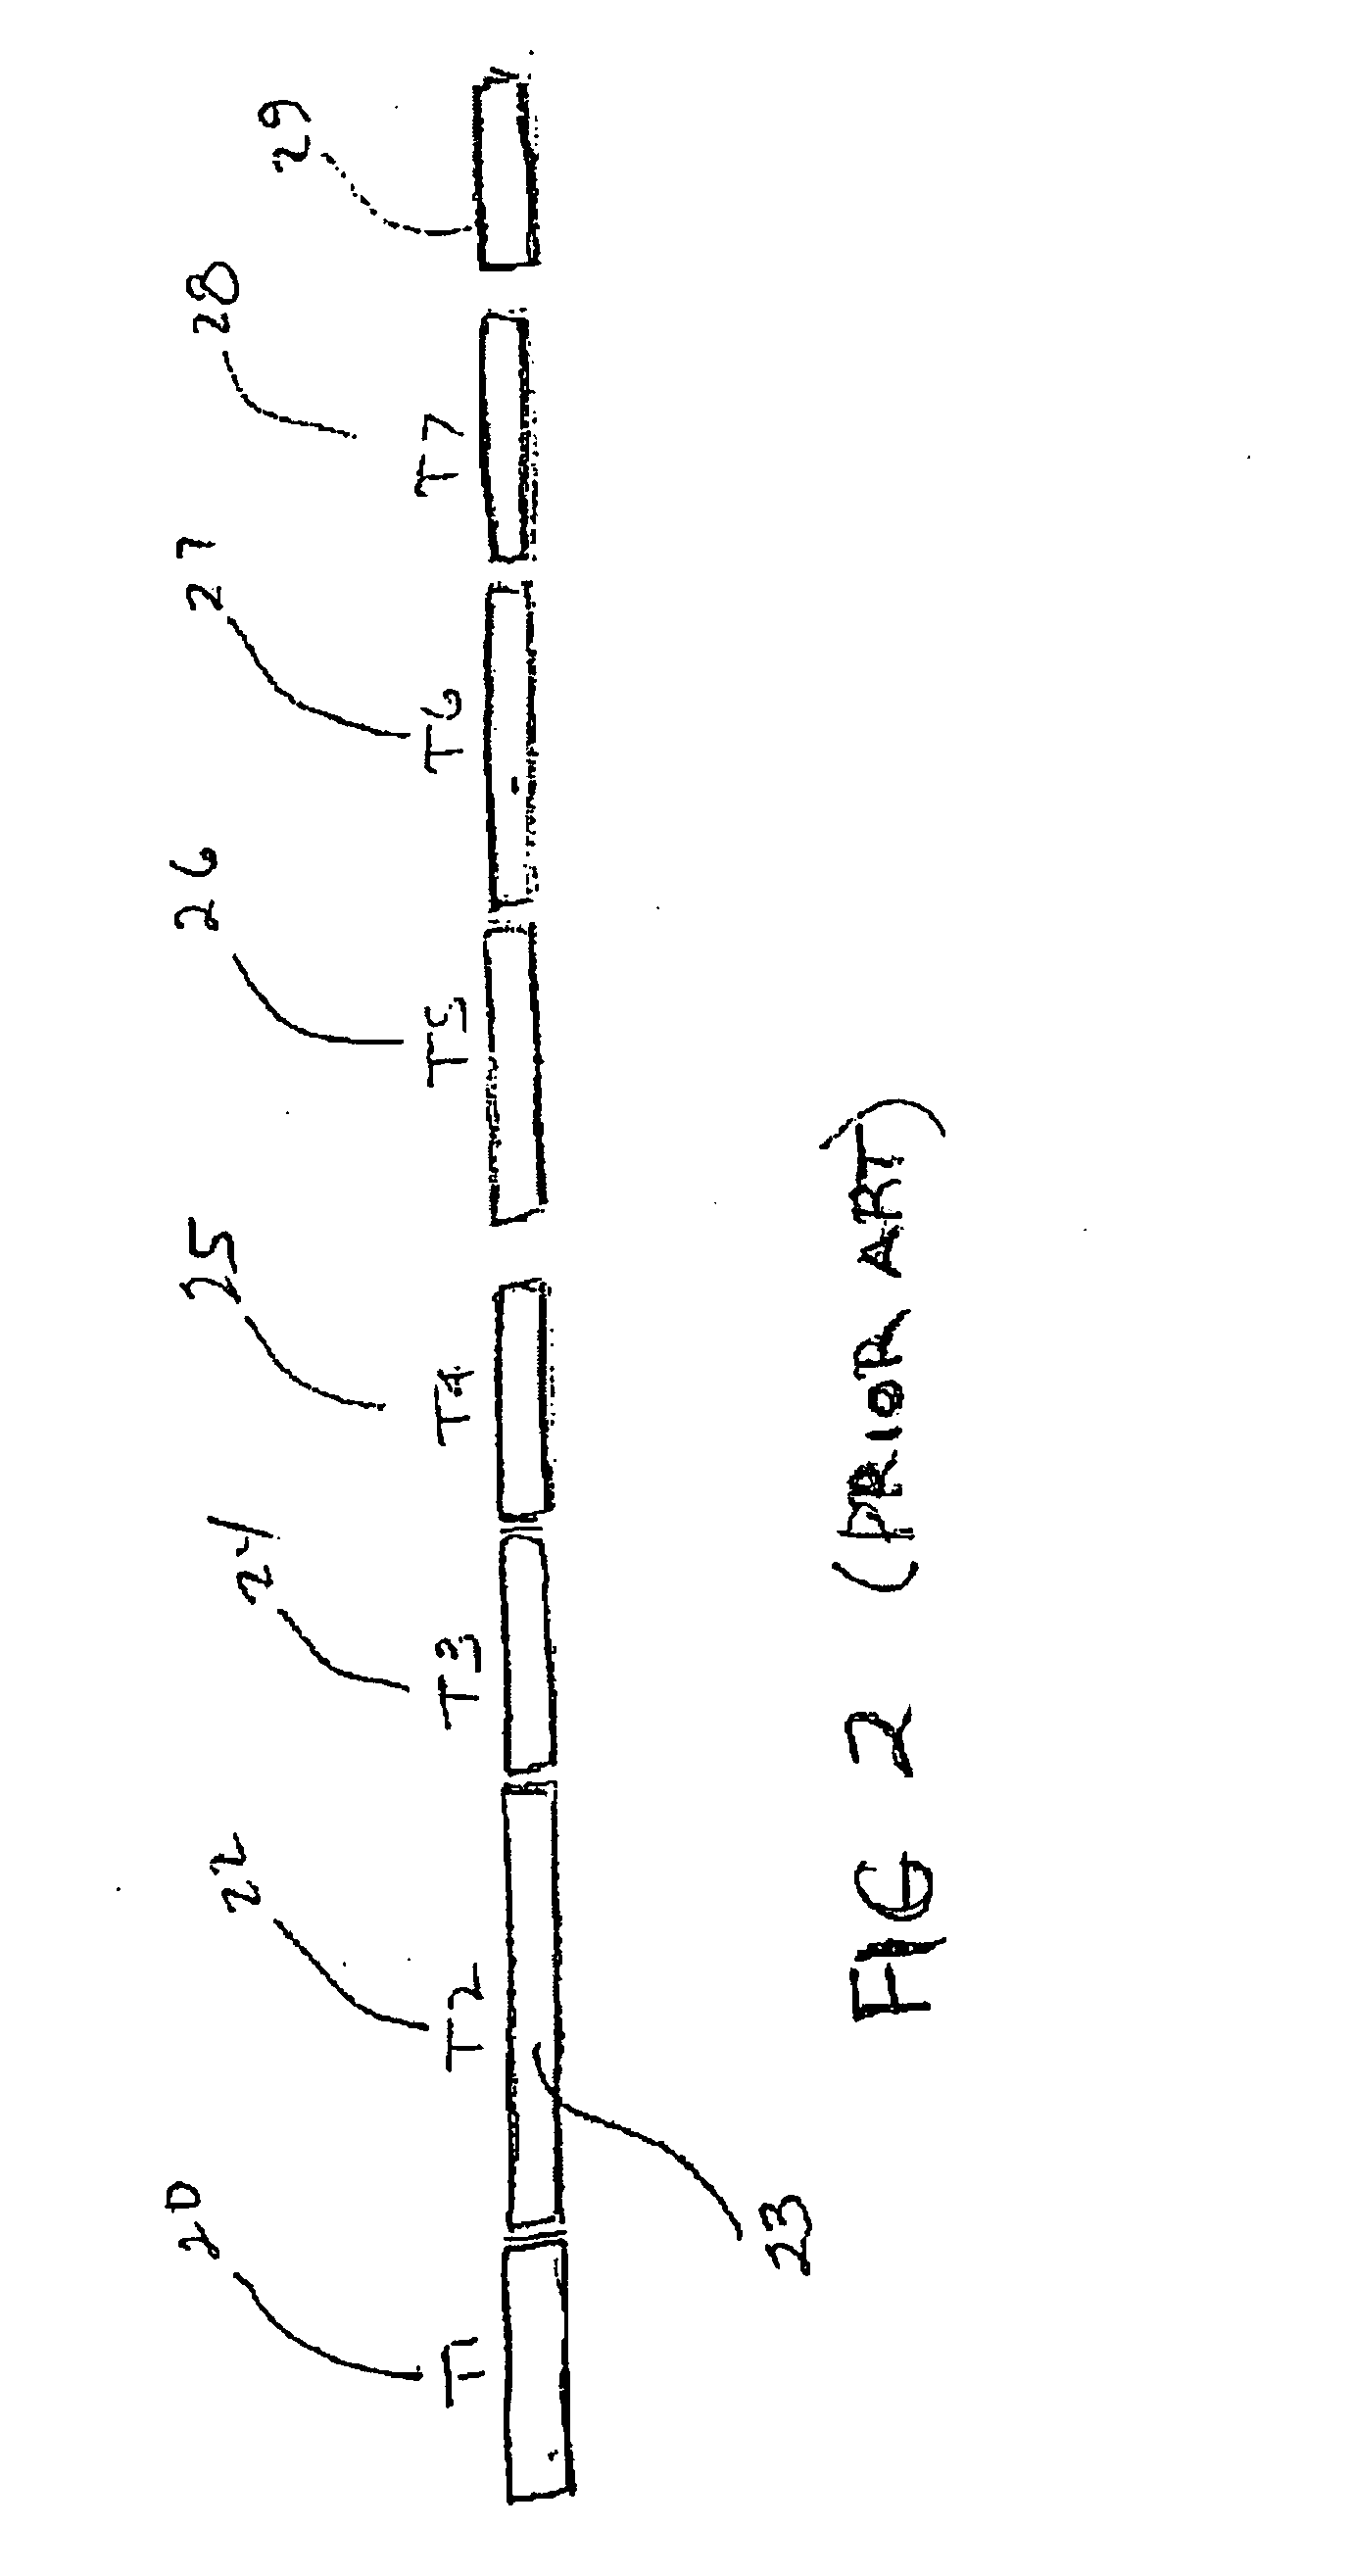 Intelligent full automation controlled flow for a semiconductor furnace tool